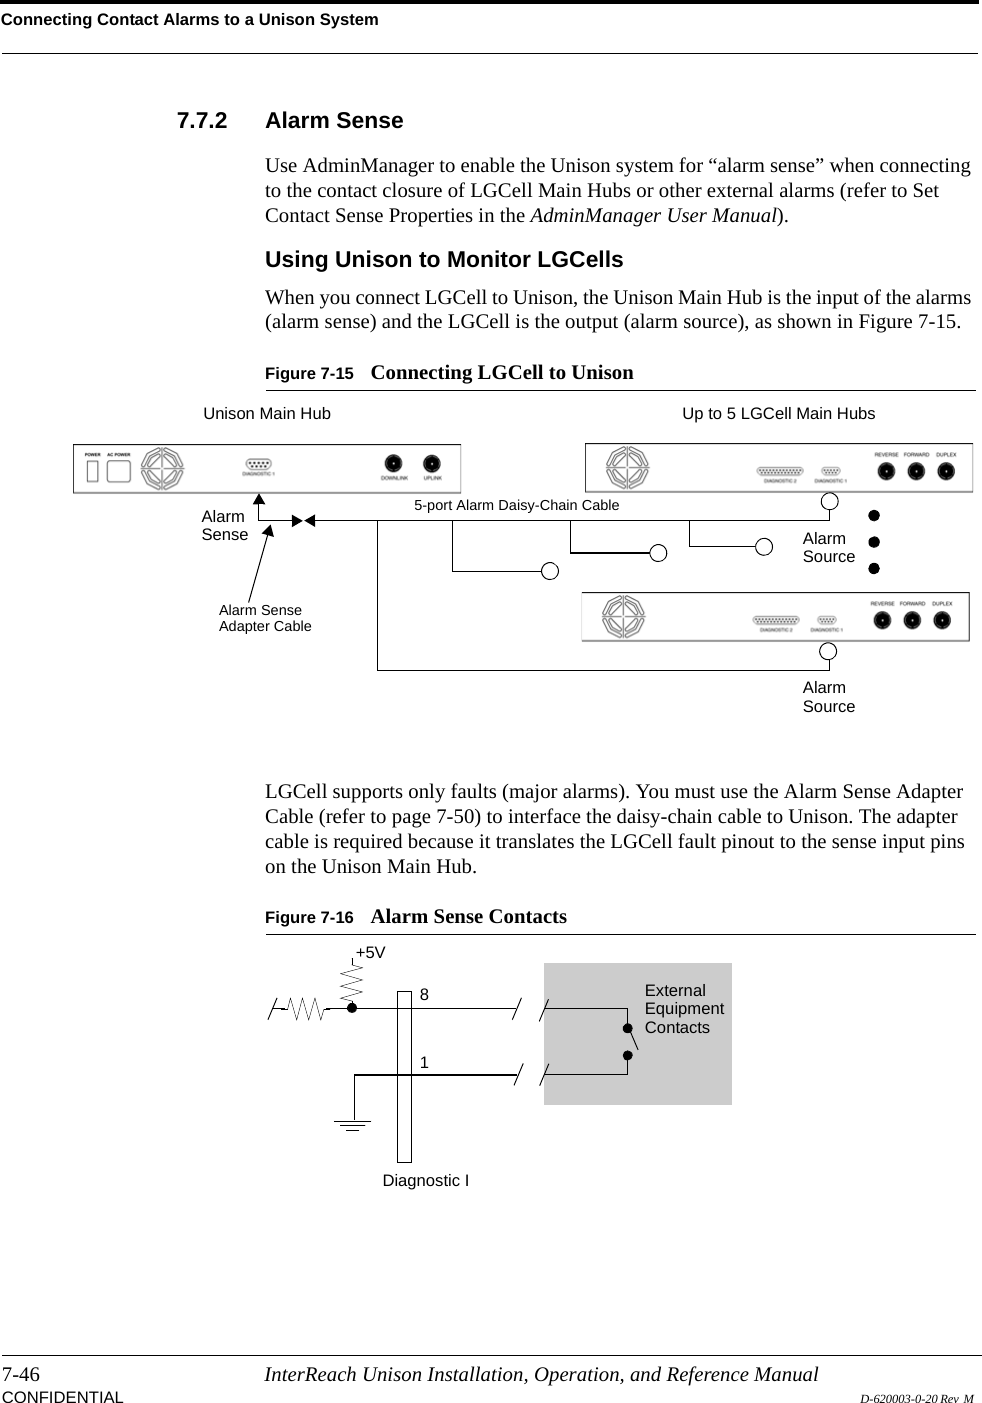 Connecting Contact Alarms to a Unison System7-46 InterReach Unison Installation, Operation, and Reference ManualCONFIDENTIAL D-620003-0-20 Rev  M 7.7.2 Alarm SenseUse AdminManager to enable the Unison system for “alarm sense” when connecting to the contact closure of LGCell Main Hubs or other external alarms (refer to Set Contact Sense Properties in the AdminManager User Manual).Using Unison to Monitor LGCellsWhen you connect LGCell to Unison, the Unison Main Hub is the input of the alarms (alarm sense) and the LGCell is the output (alarm source), as shown in Figure 7-15.Figure 7-15 Connecting LGCell to UnisonLGCell supports only faults (major alarms). You must use the Alarm Sense Adapter Cable (refer to page 7-50) to interface the daisy-chain cable to Unison. The adapter cable is required because it translates the LGCell fault pinout to the sense input pins on the Unison Main Hub.Figure 7-16 Alarm Sense ContactsUp to 5 LGCell Main HubsUnison Main HubAlarmSense AlarmSourceAlarmSourceAlarm SenseAdapter Cable5-port Alarm Daisy-Chain Cable81Diagnostic IExternalEquipmentContacts+5V